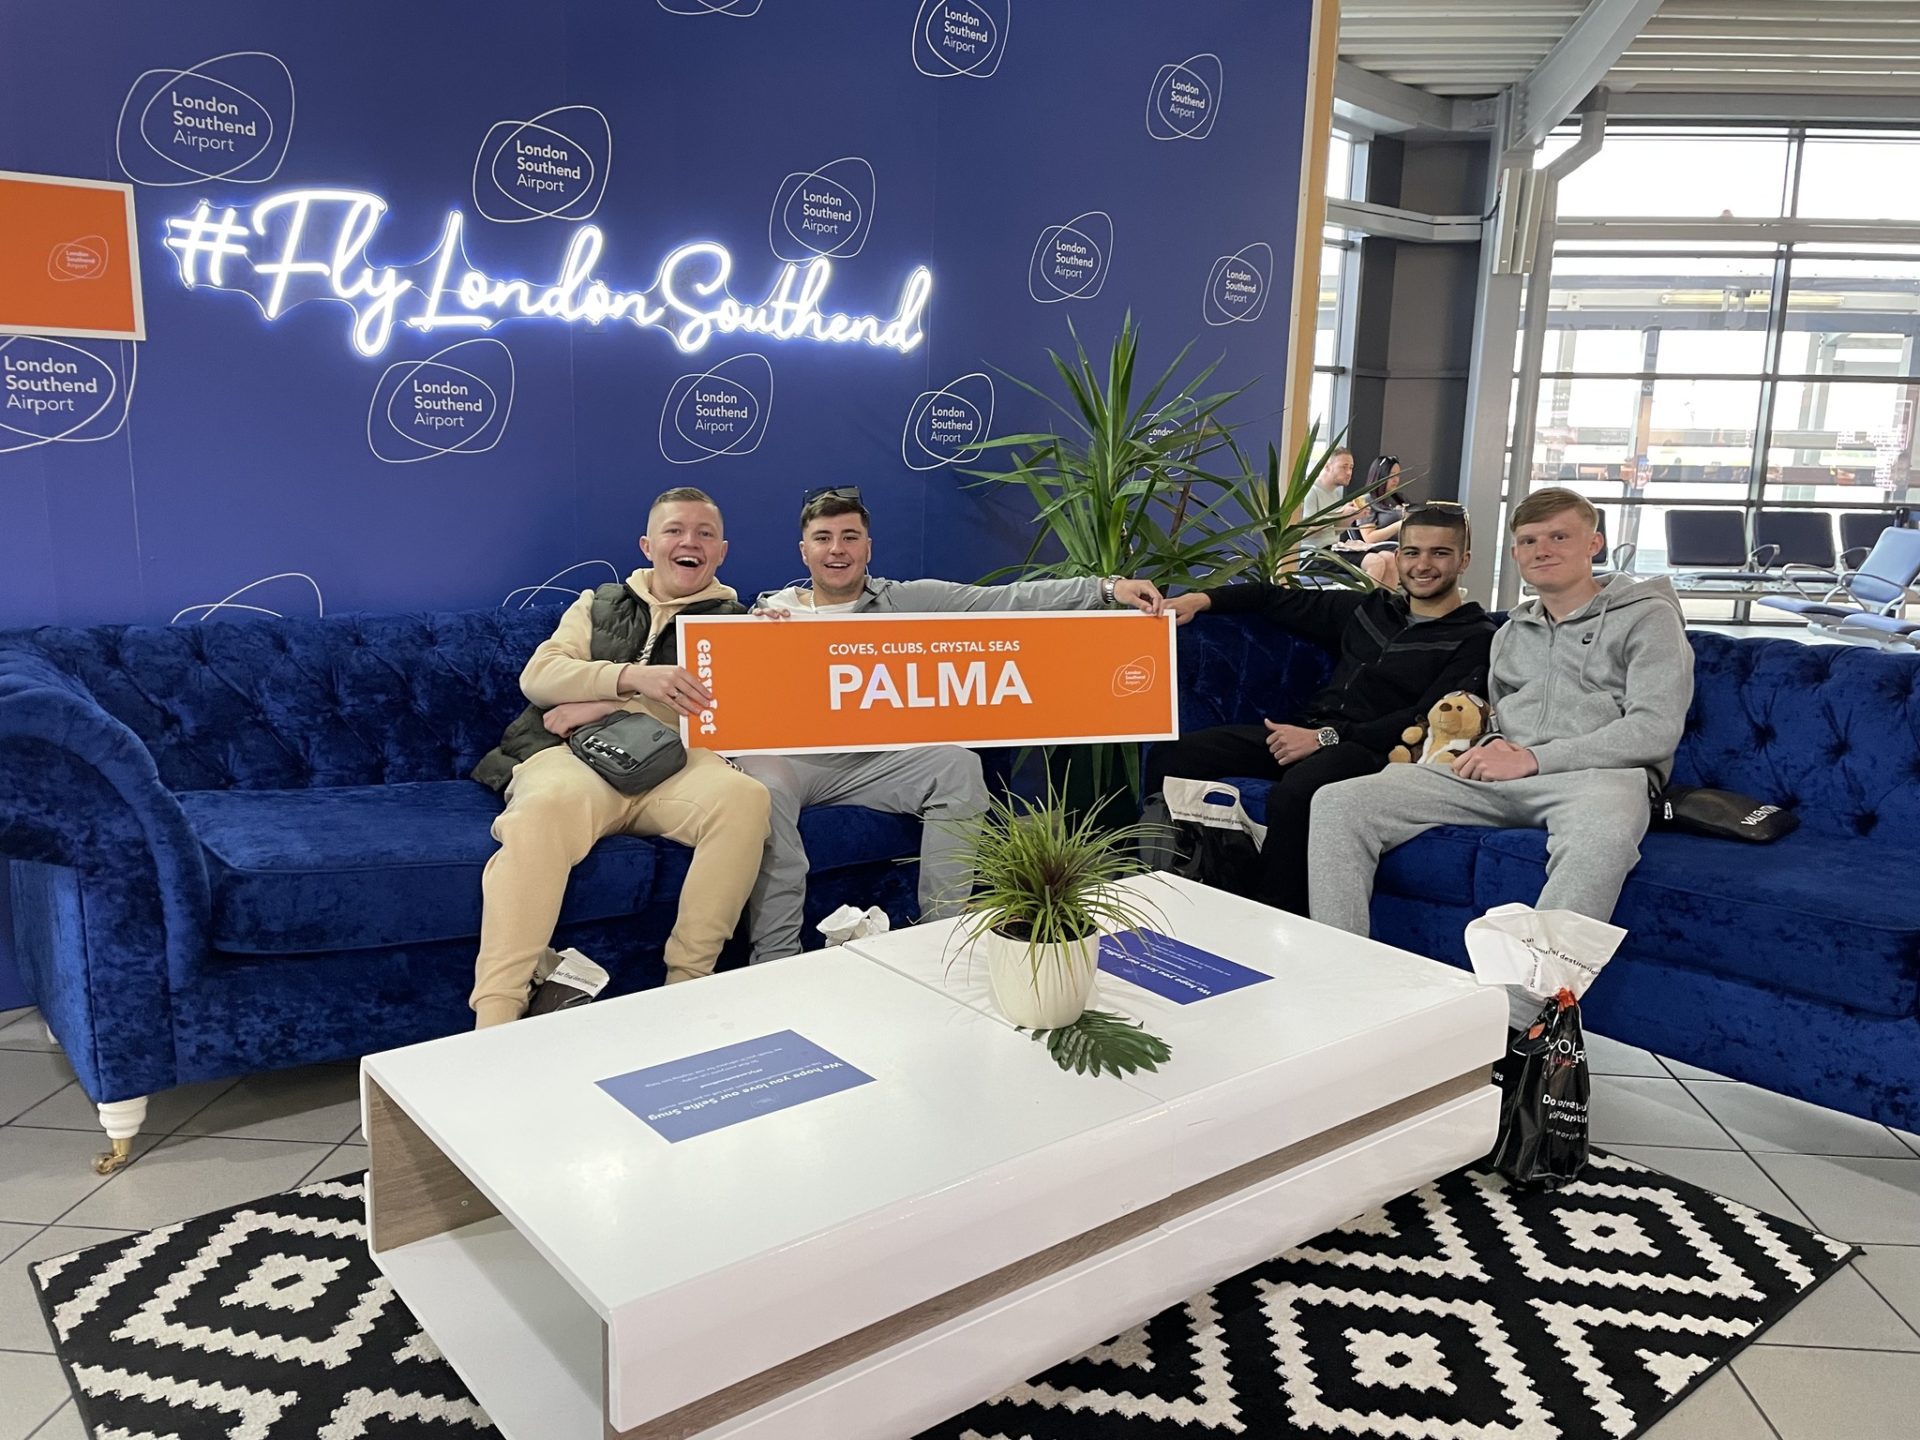 A group of passengers celebrating the launch of flights to Palma de Mallorca at The Snug, in the Departures Lounge at London Southend Airport